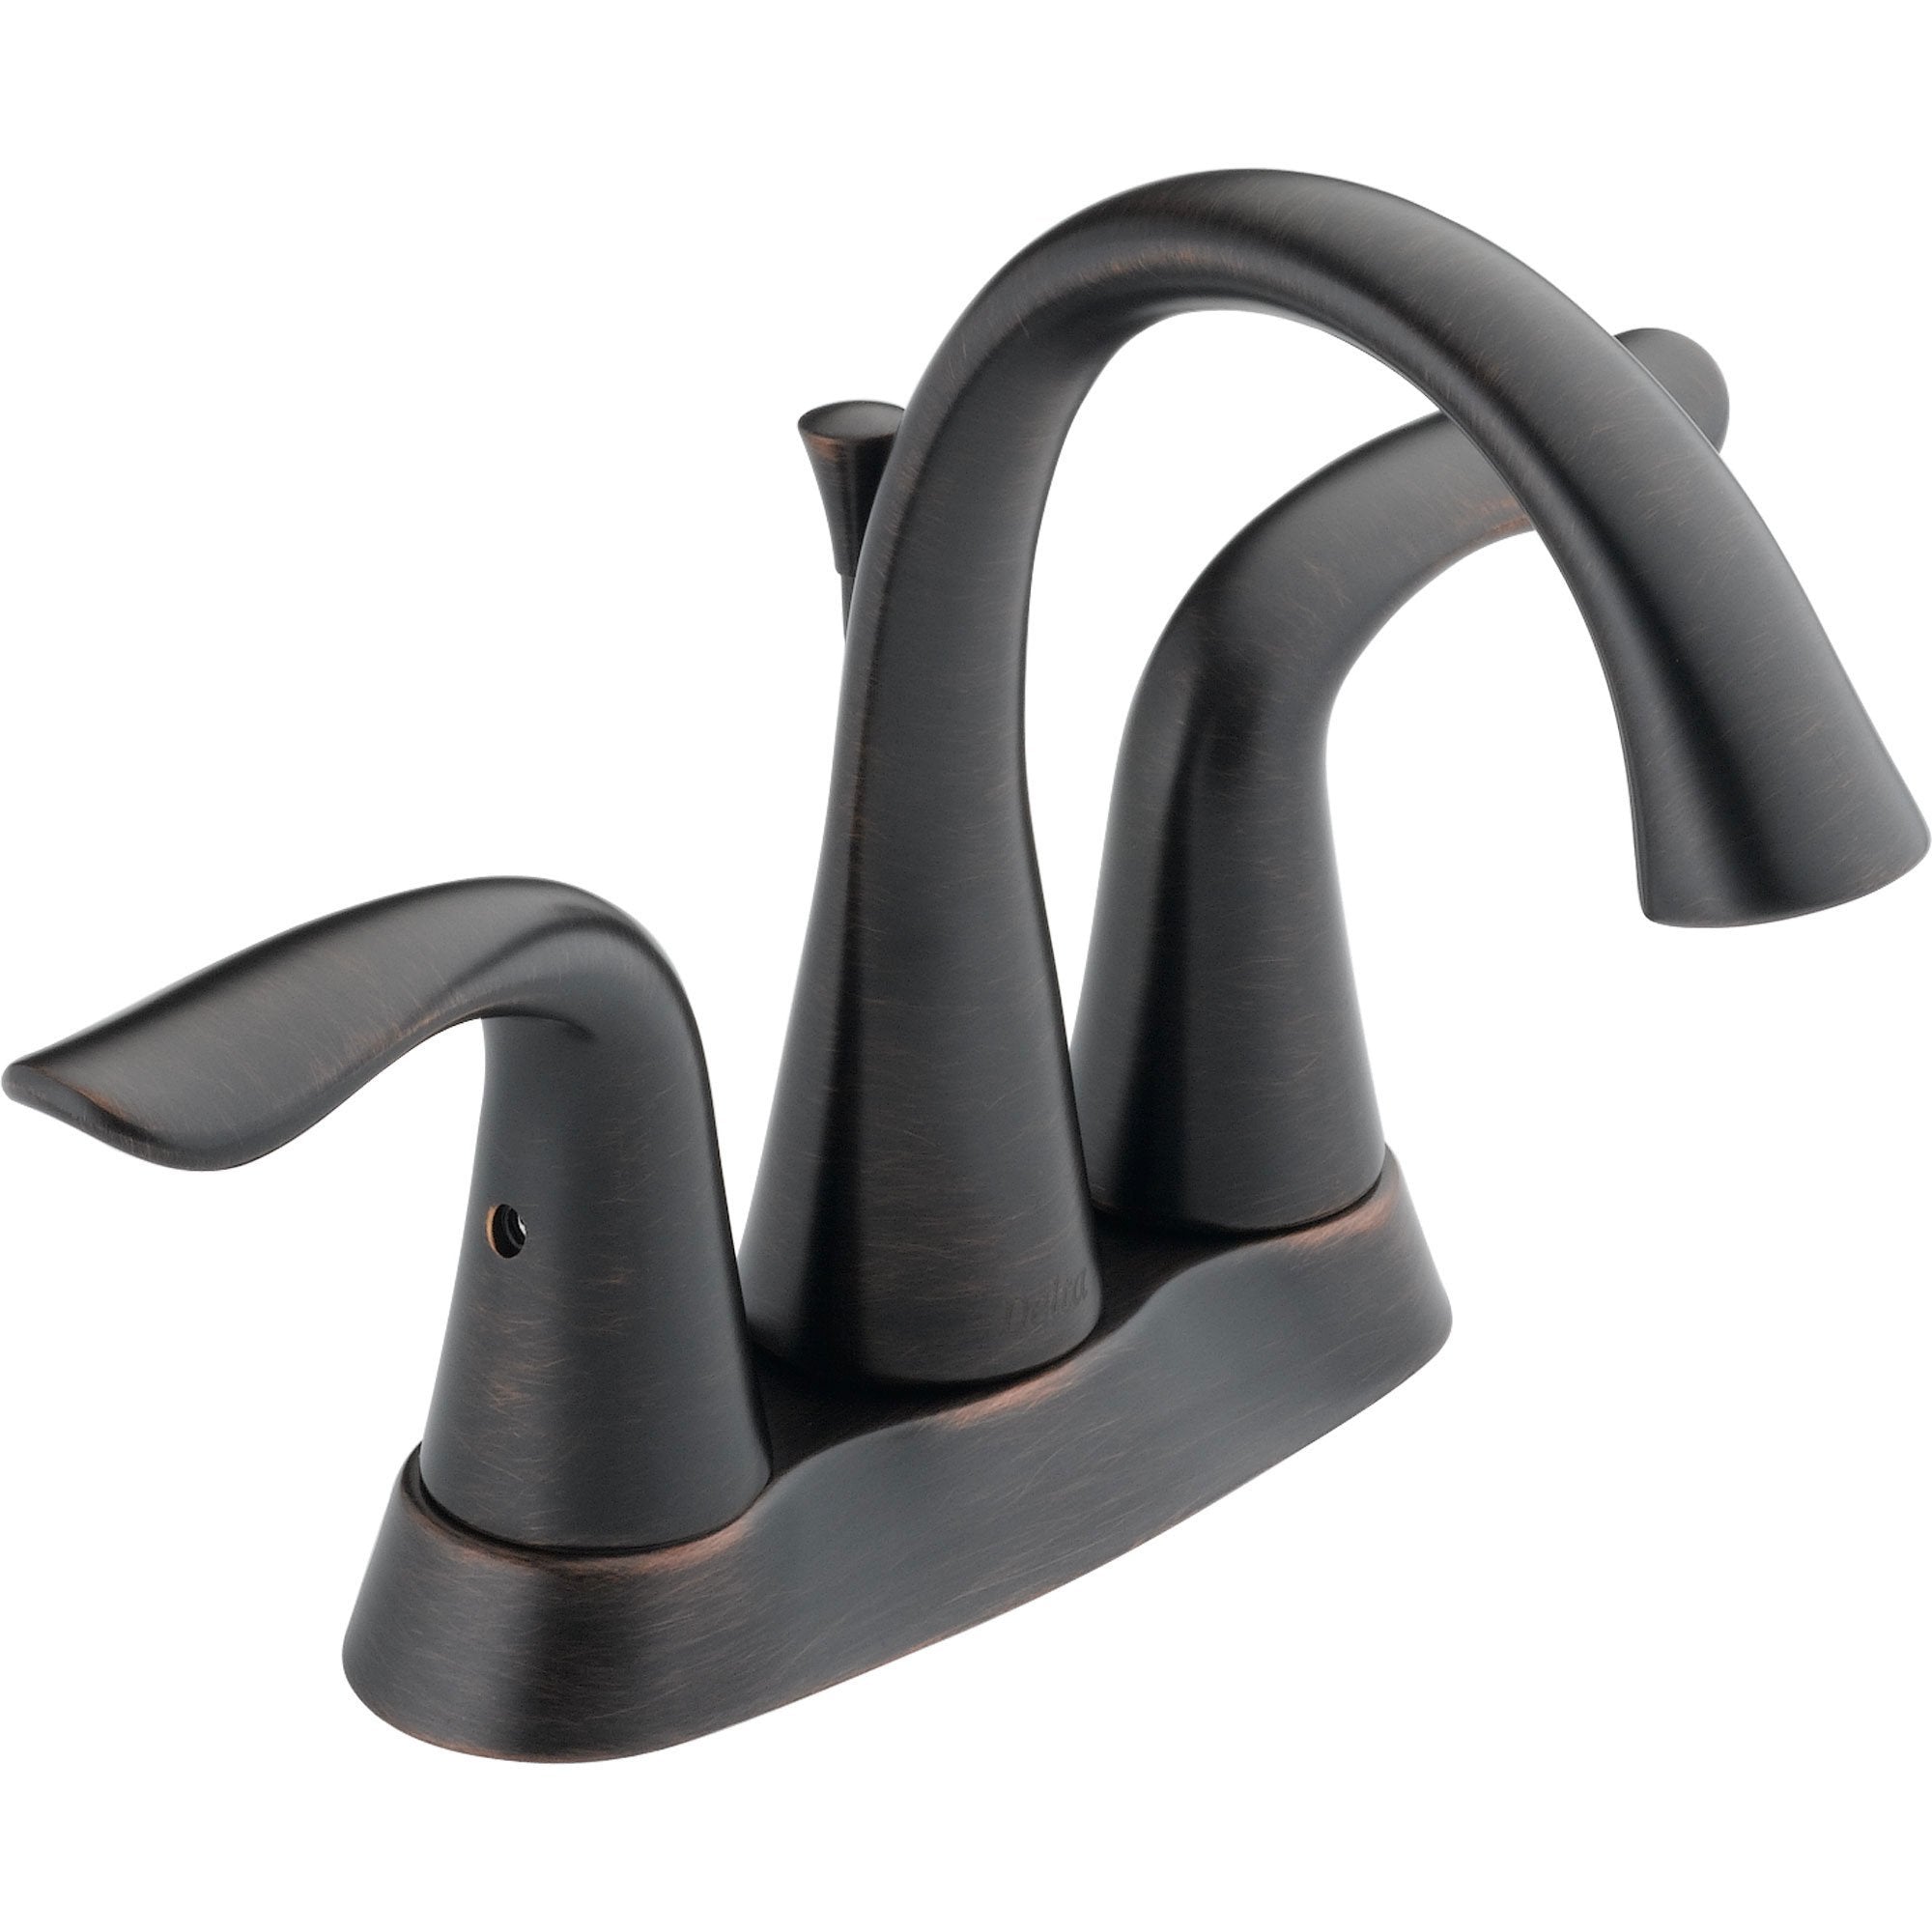 Stern | Touchless Faucets, Soap Dispensers, Hand Dryers & Accessories